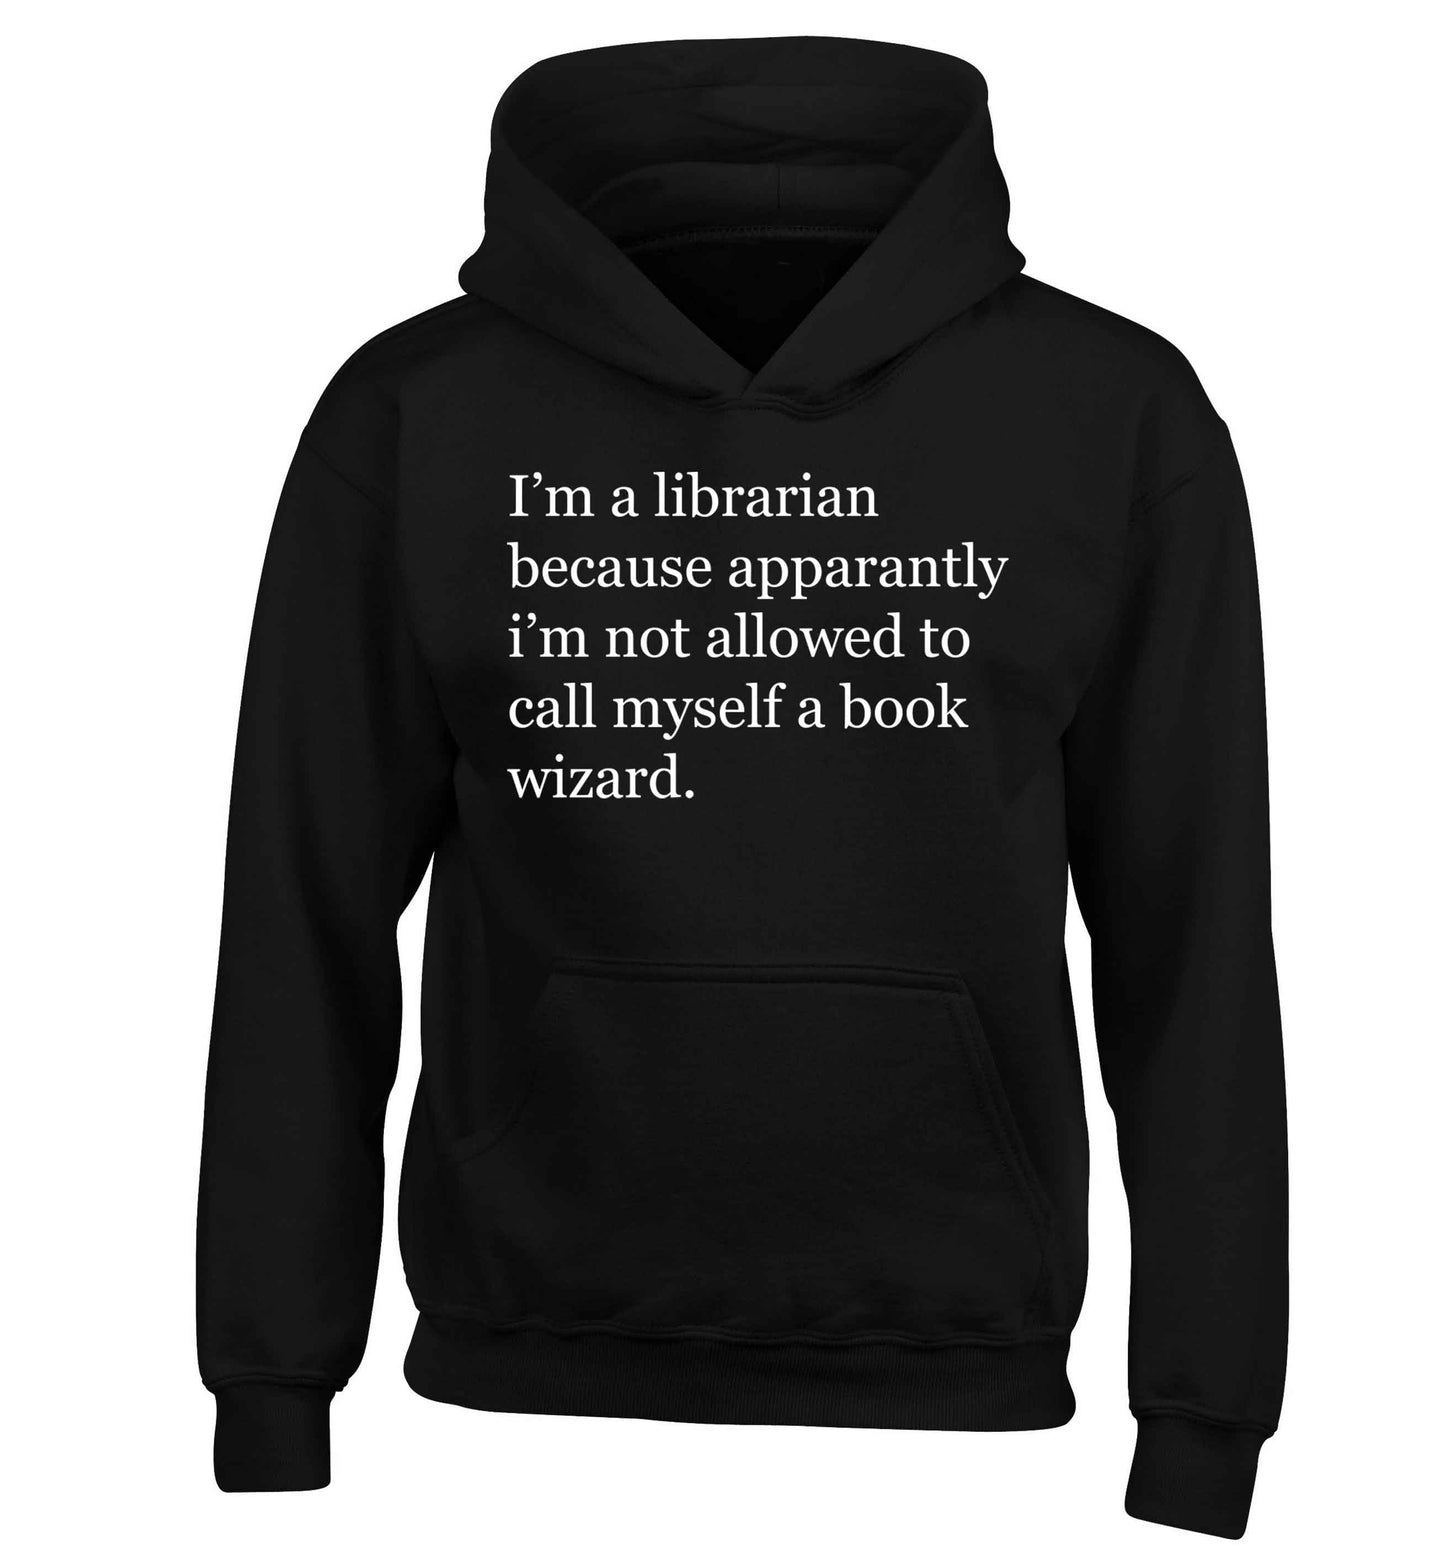 i√ïm a librarian because apparantly i√ïm not allowed to call myself a book wizard children's black hoodie 12-13 Years